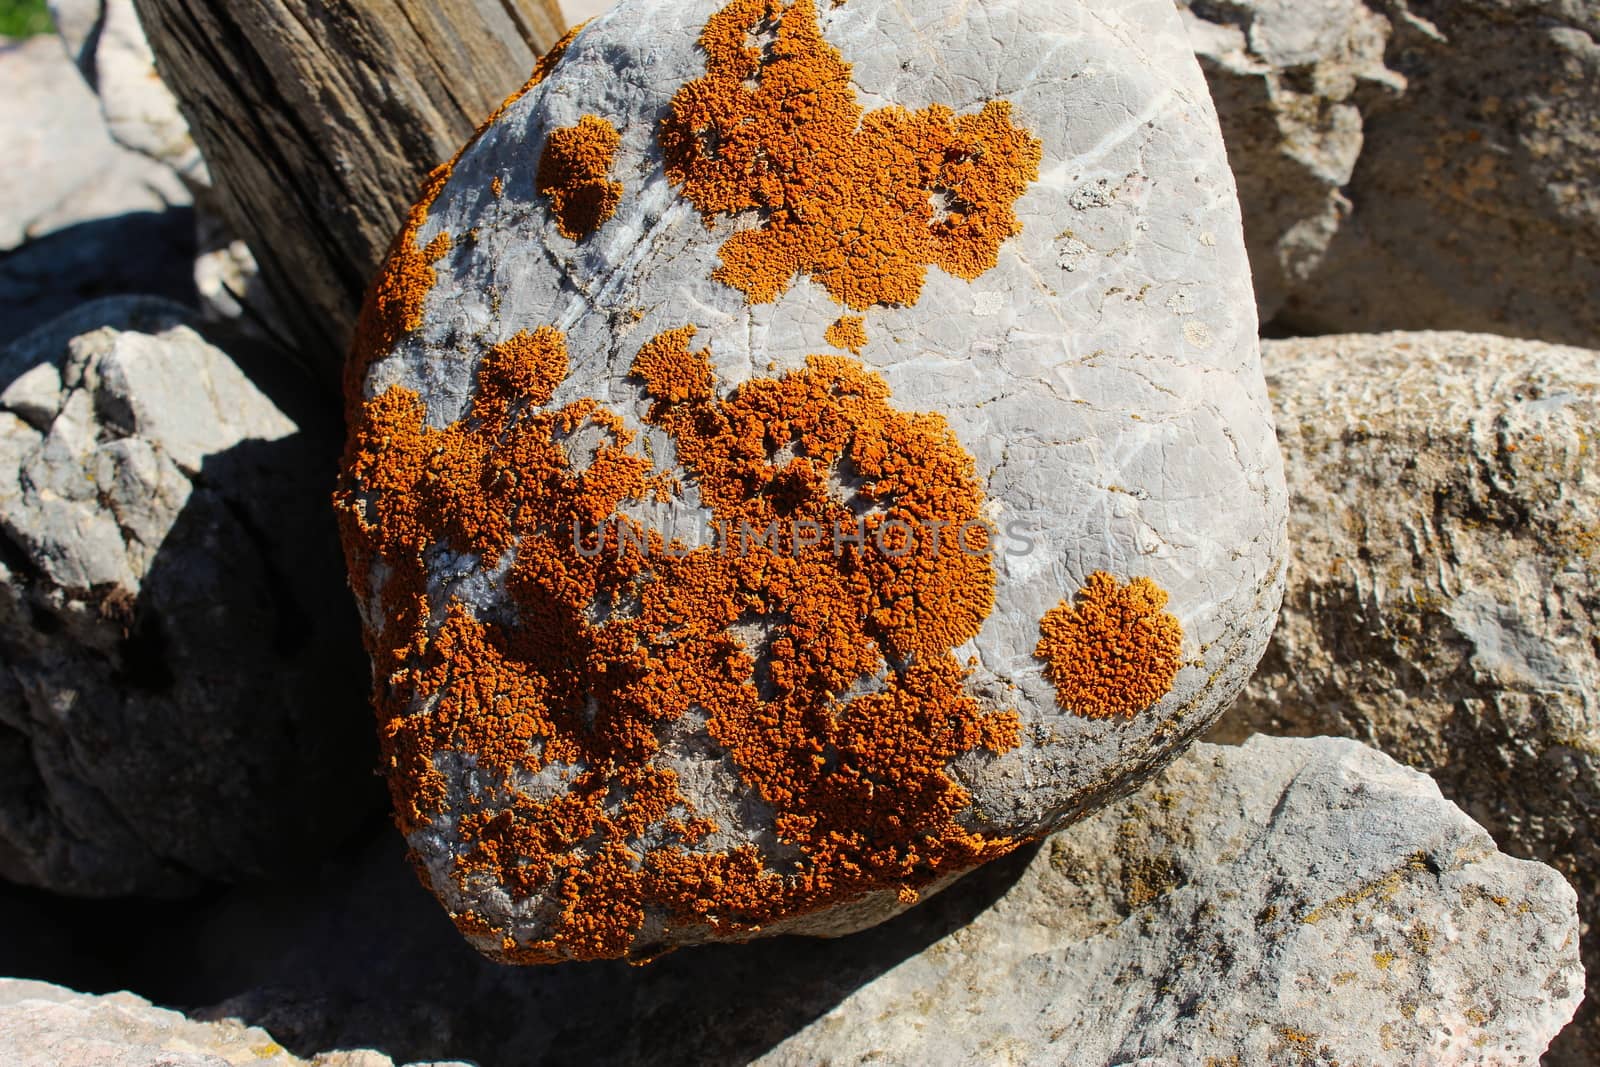 Orange spots (lichens) on a rock in the mountains. Mountain Bjelasnica, Bosnia and Herzegovina.